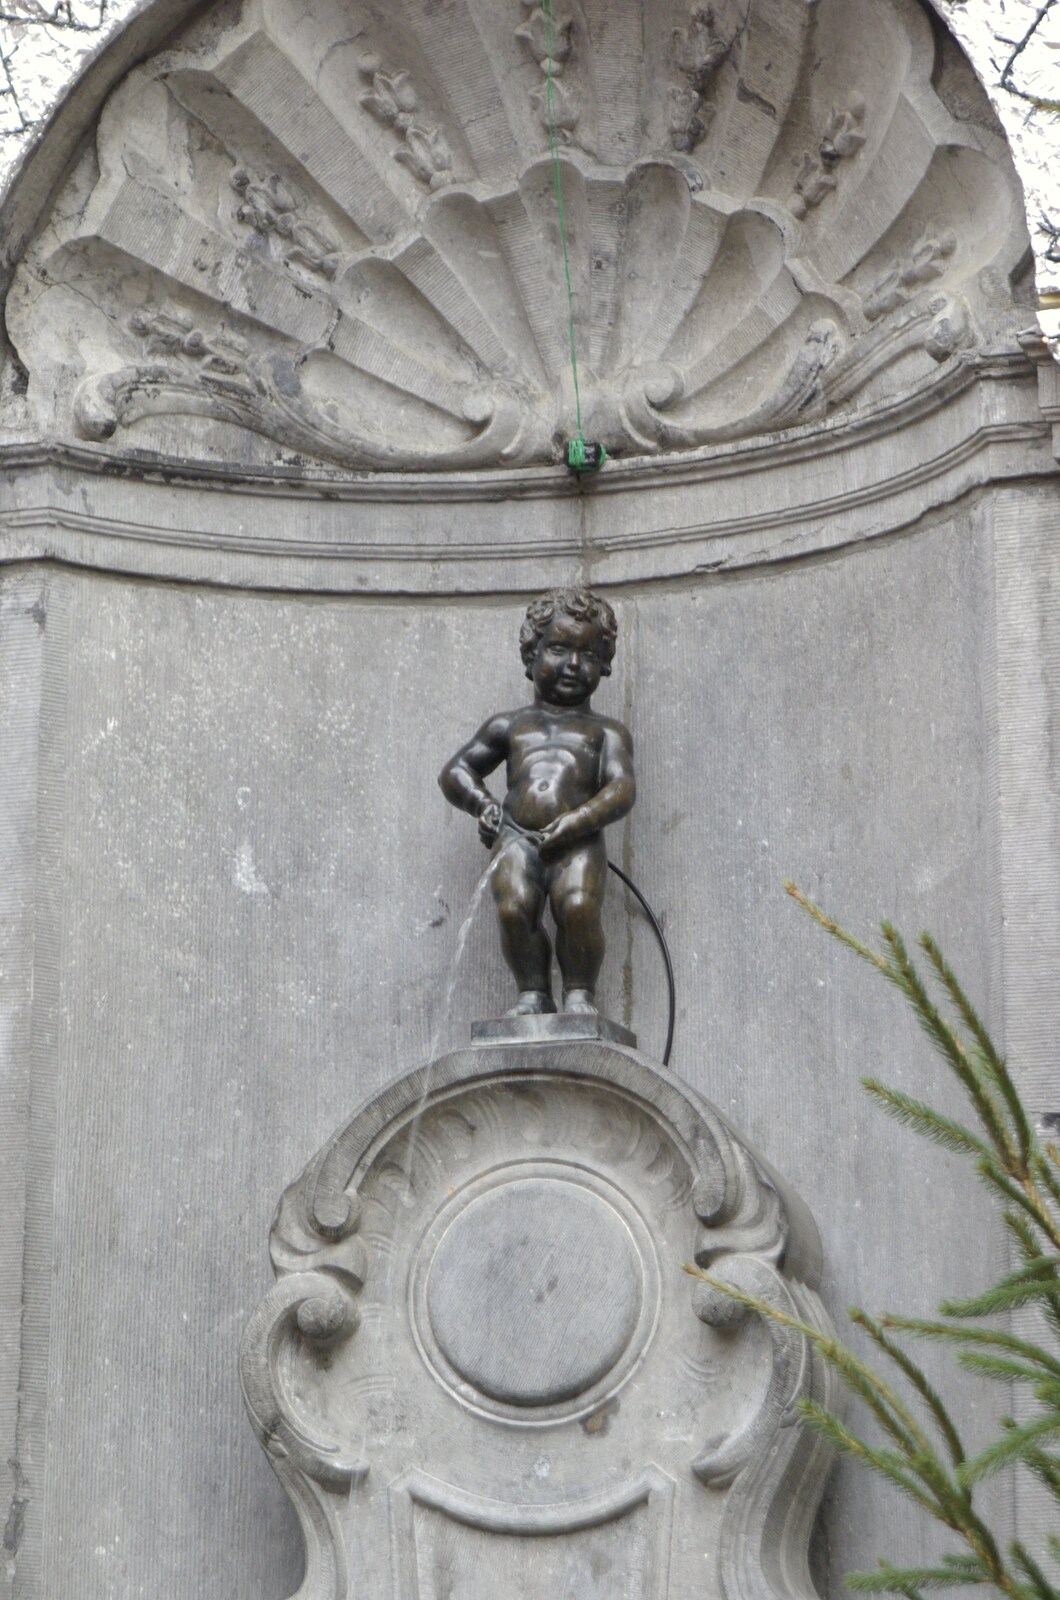 Brussels' famouse Manneken Pis statue from The Christmas Markets of Brussels, Belgium - 1st January 2007